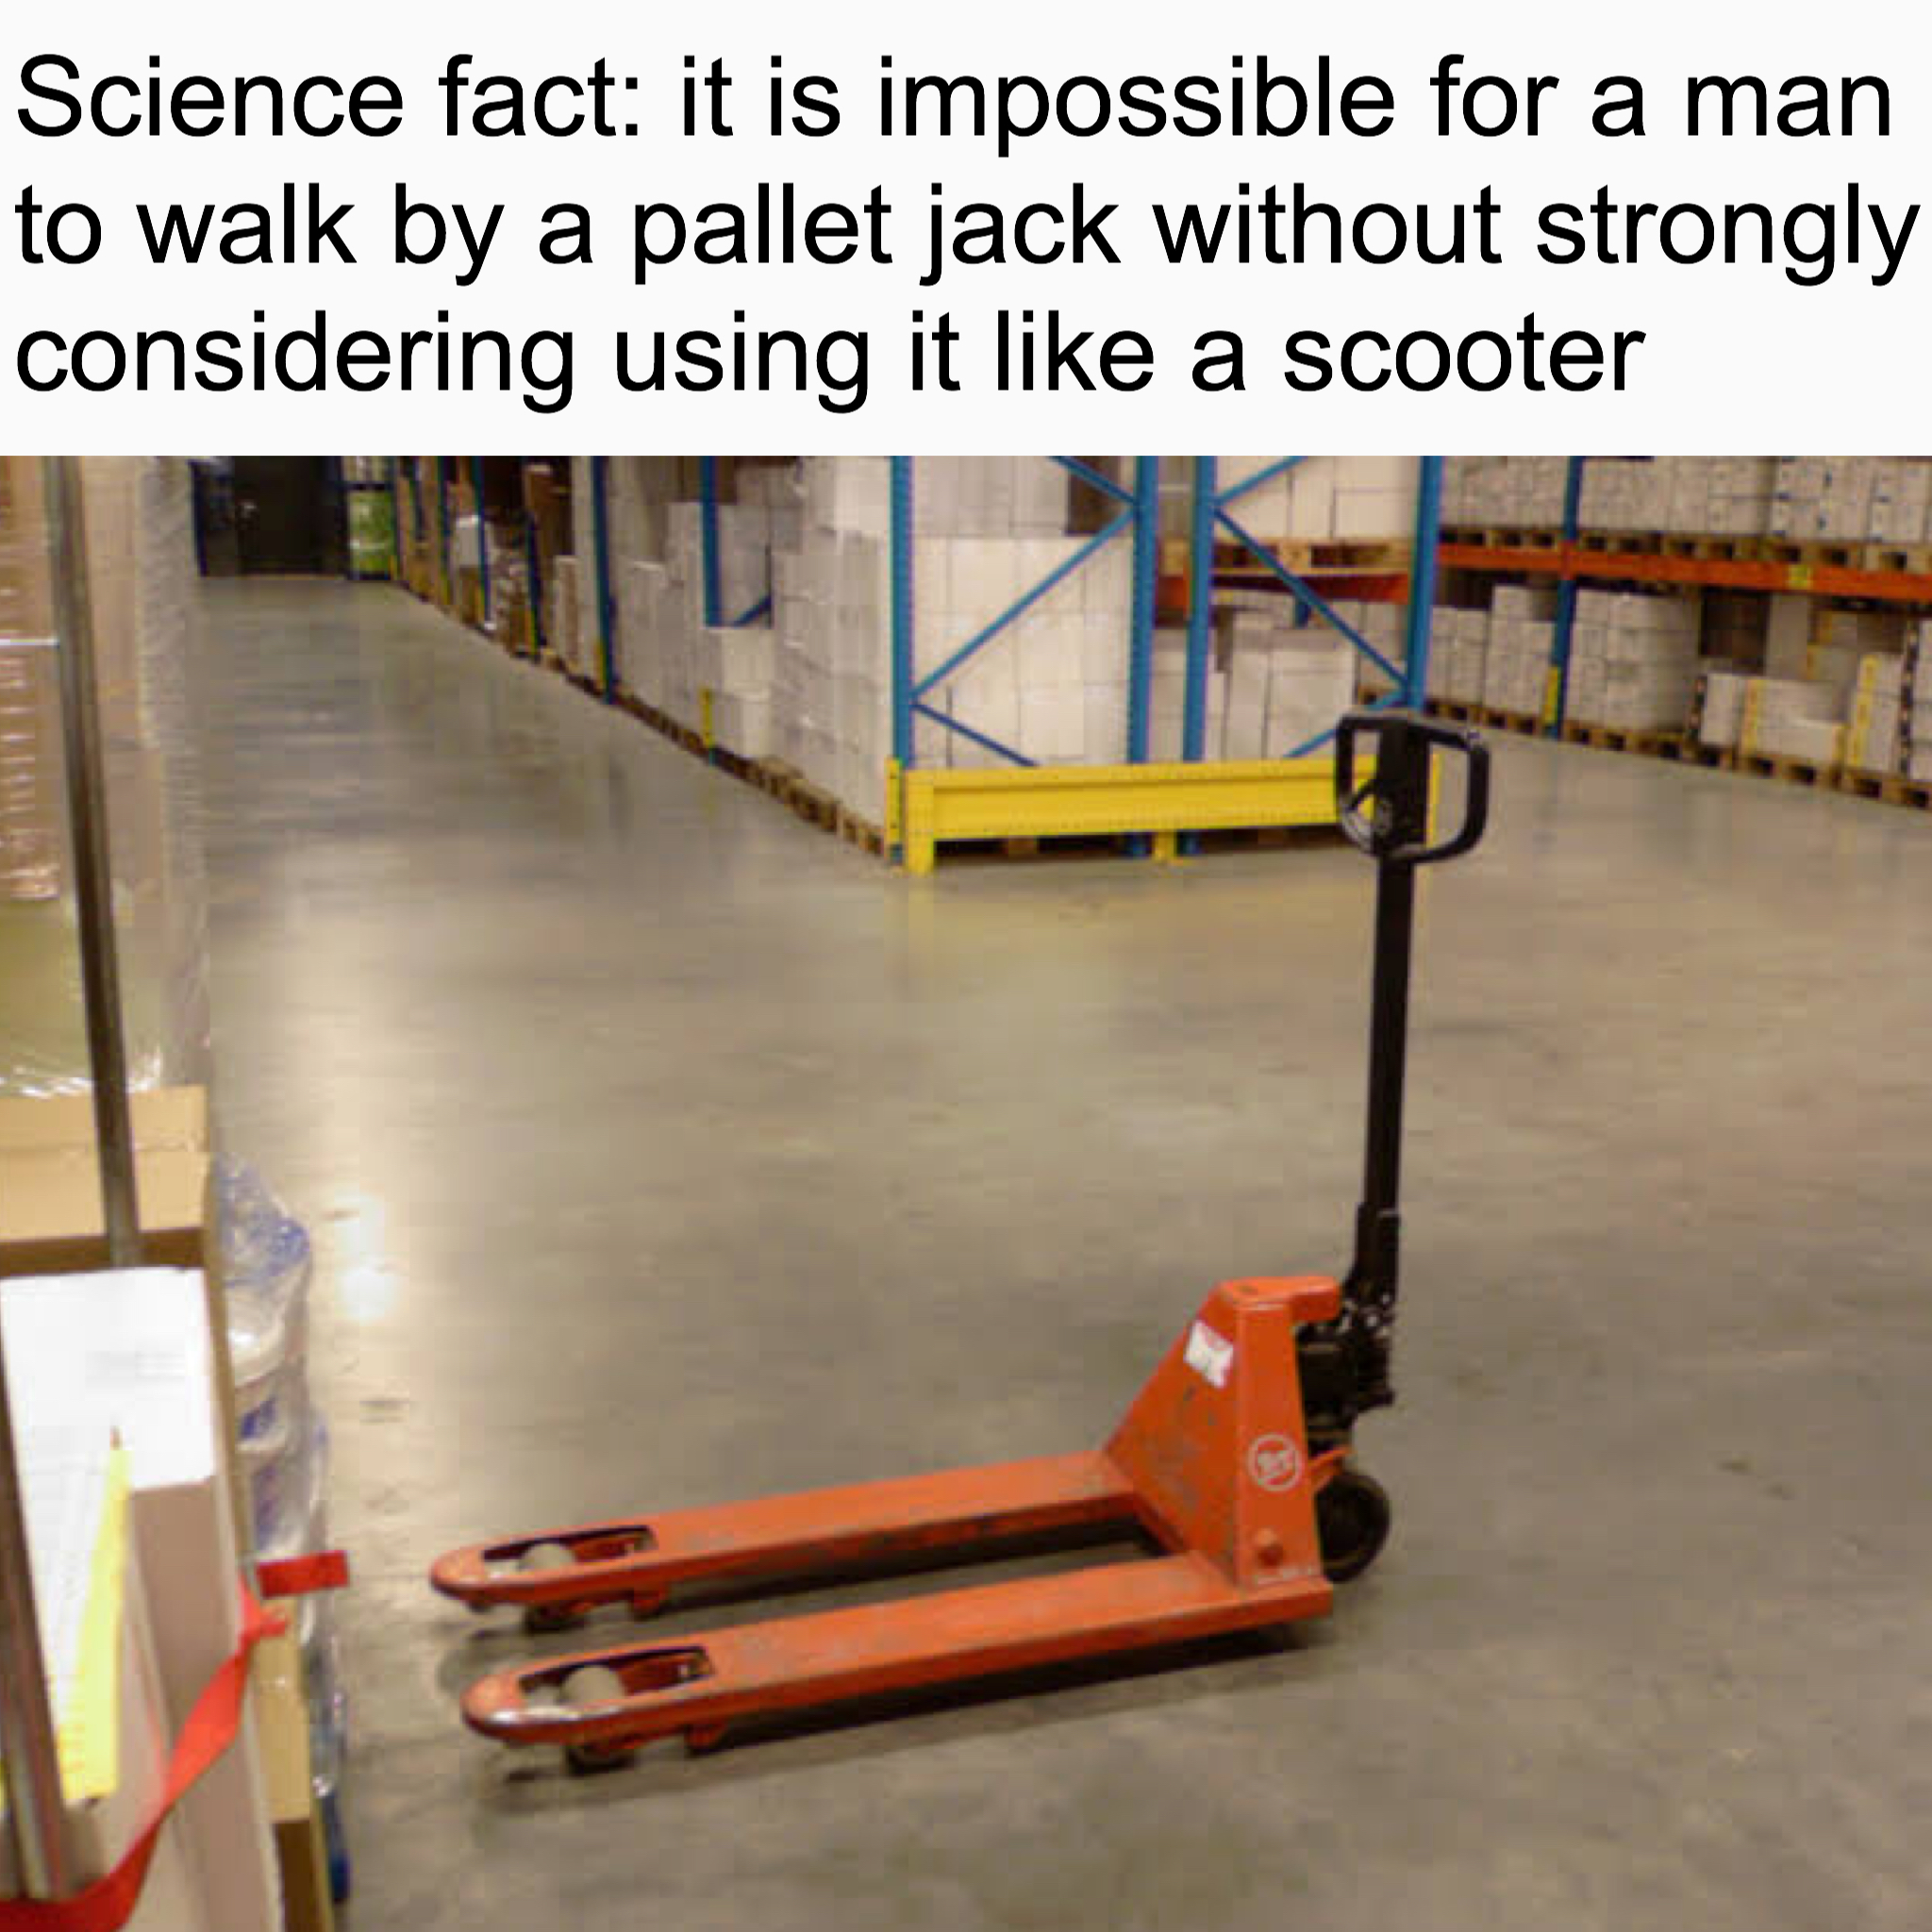 warehouse funny - Science fact it is impossible for a man to walk by a pallet jack without strongly considering using it a scooter